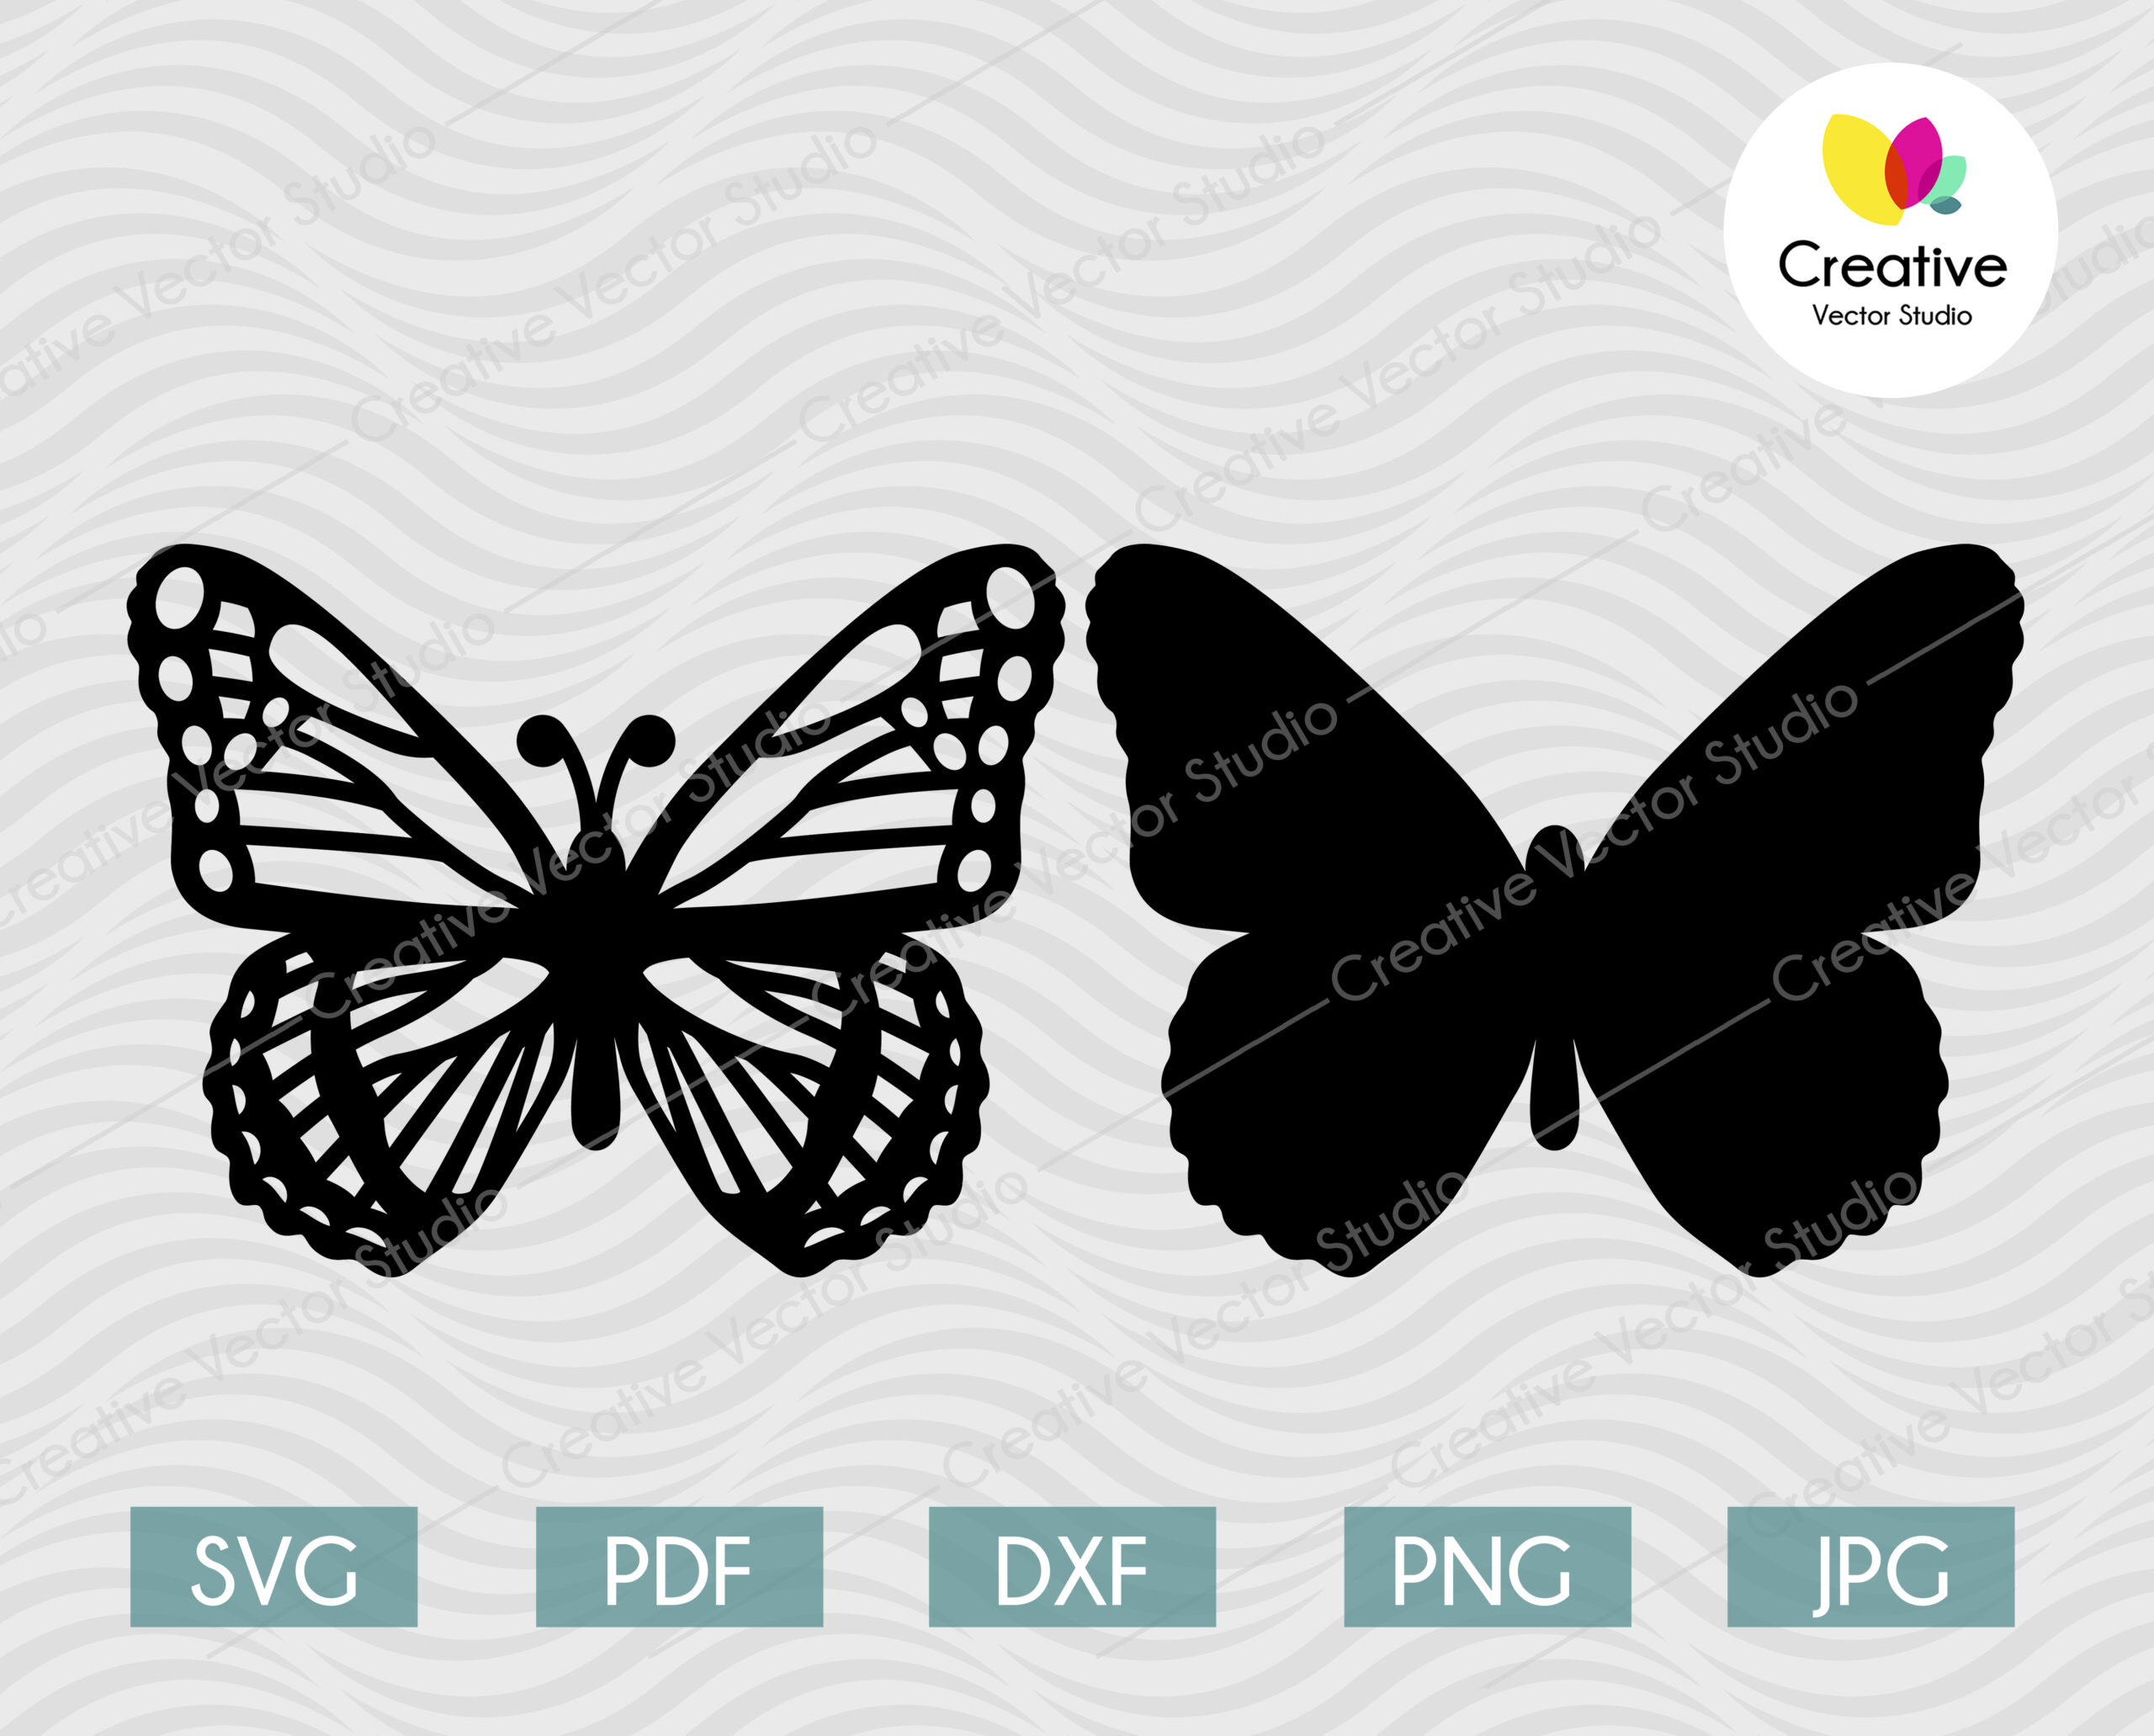 Dxf Butterfly Clipart Eps Vector Butterfly SVG Butterfly #7 SVG Butterfly Cut Files For Silhouette Butterfly Files for Cricut Png